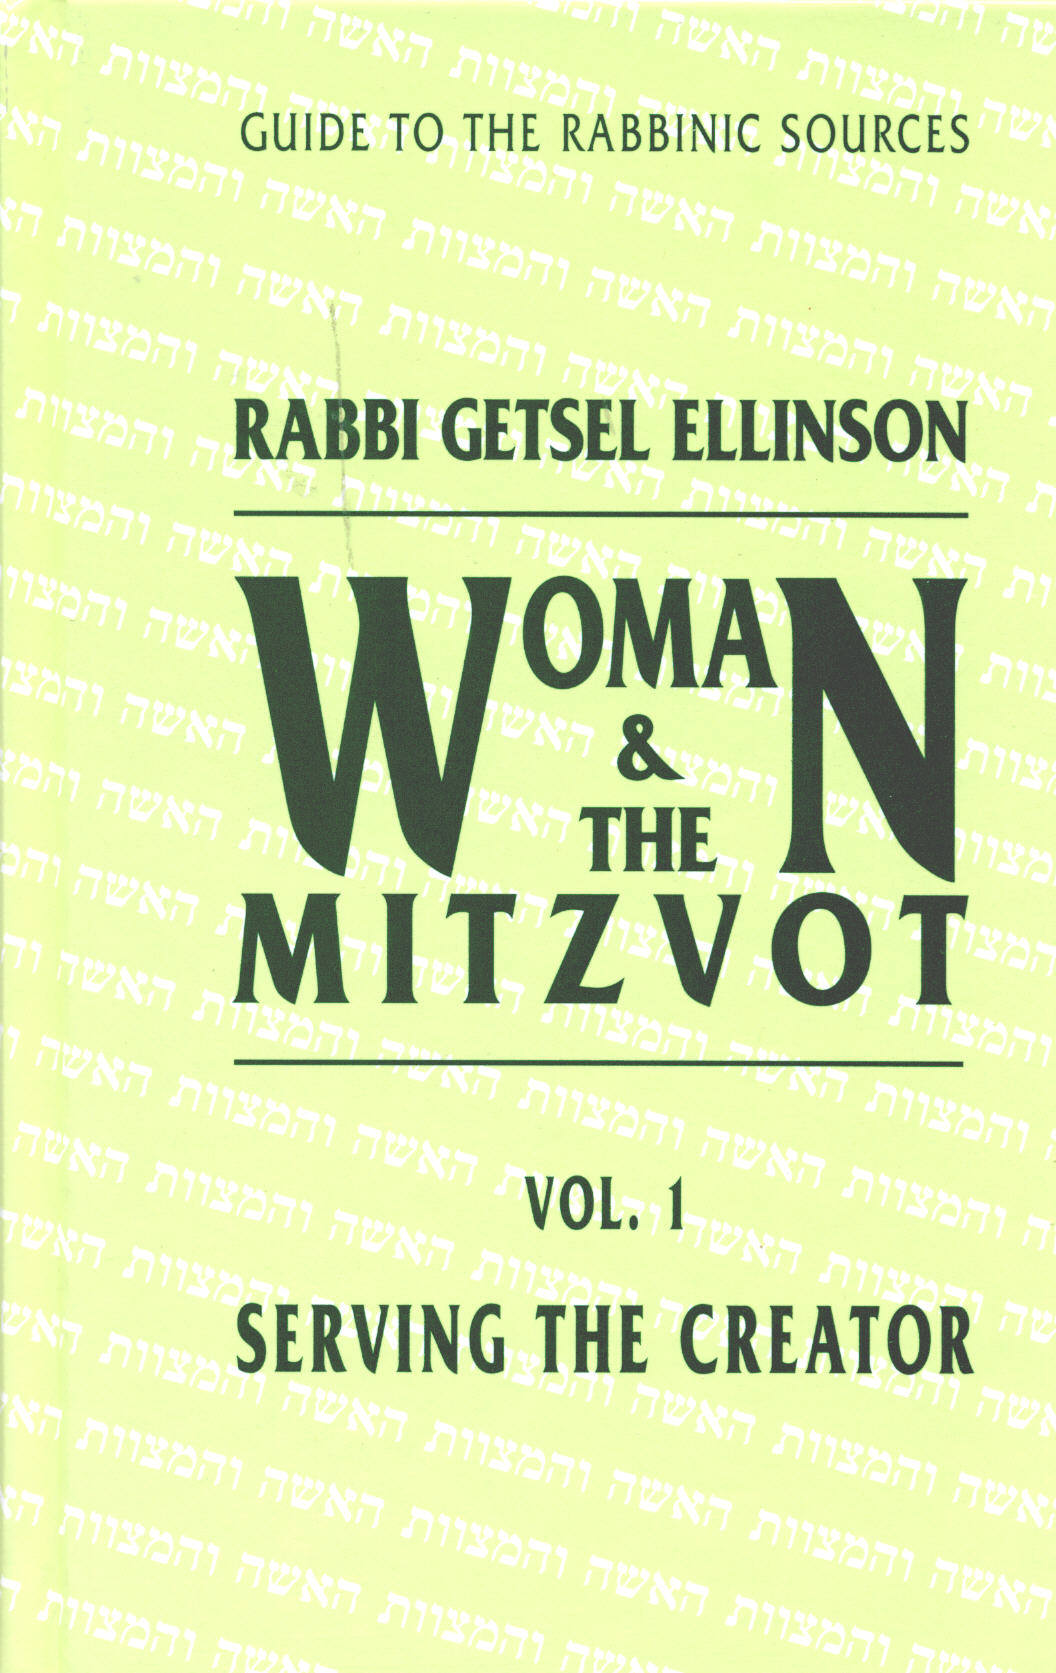  Woman and Mitzvot Volume 1: Serving the Creator